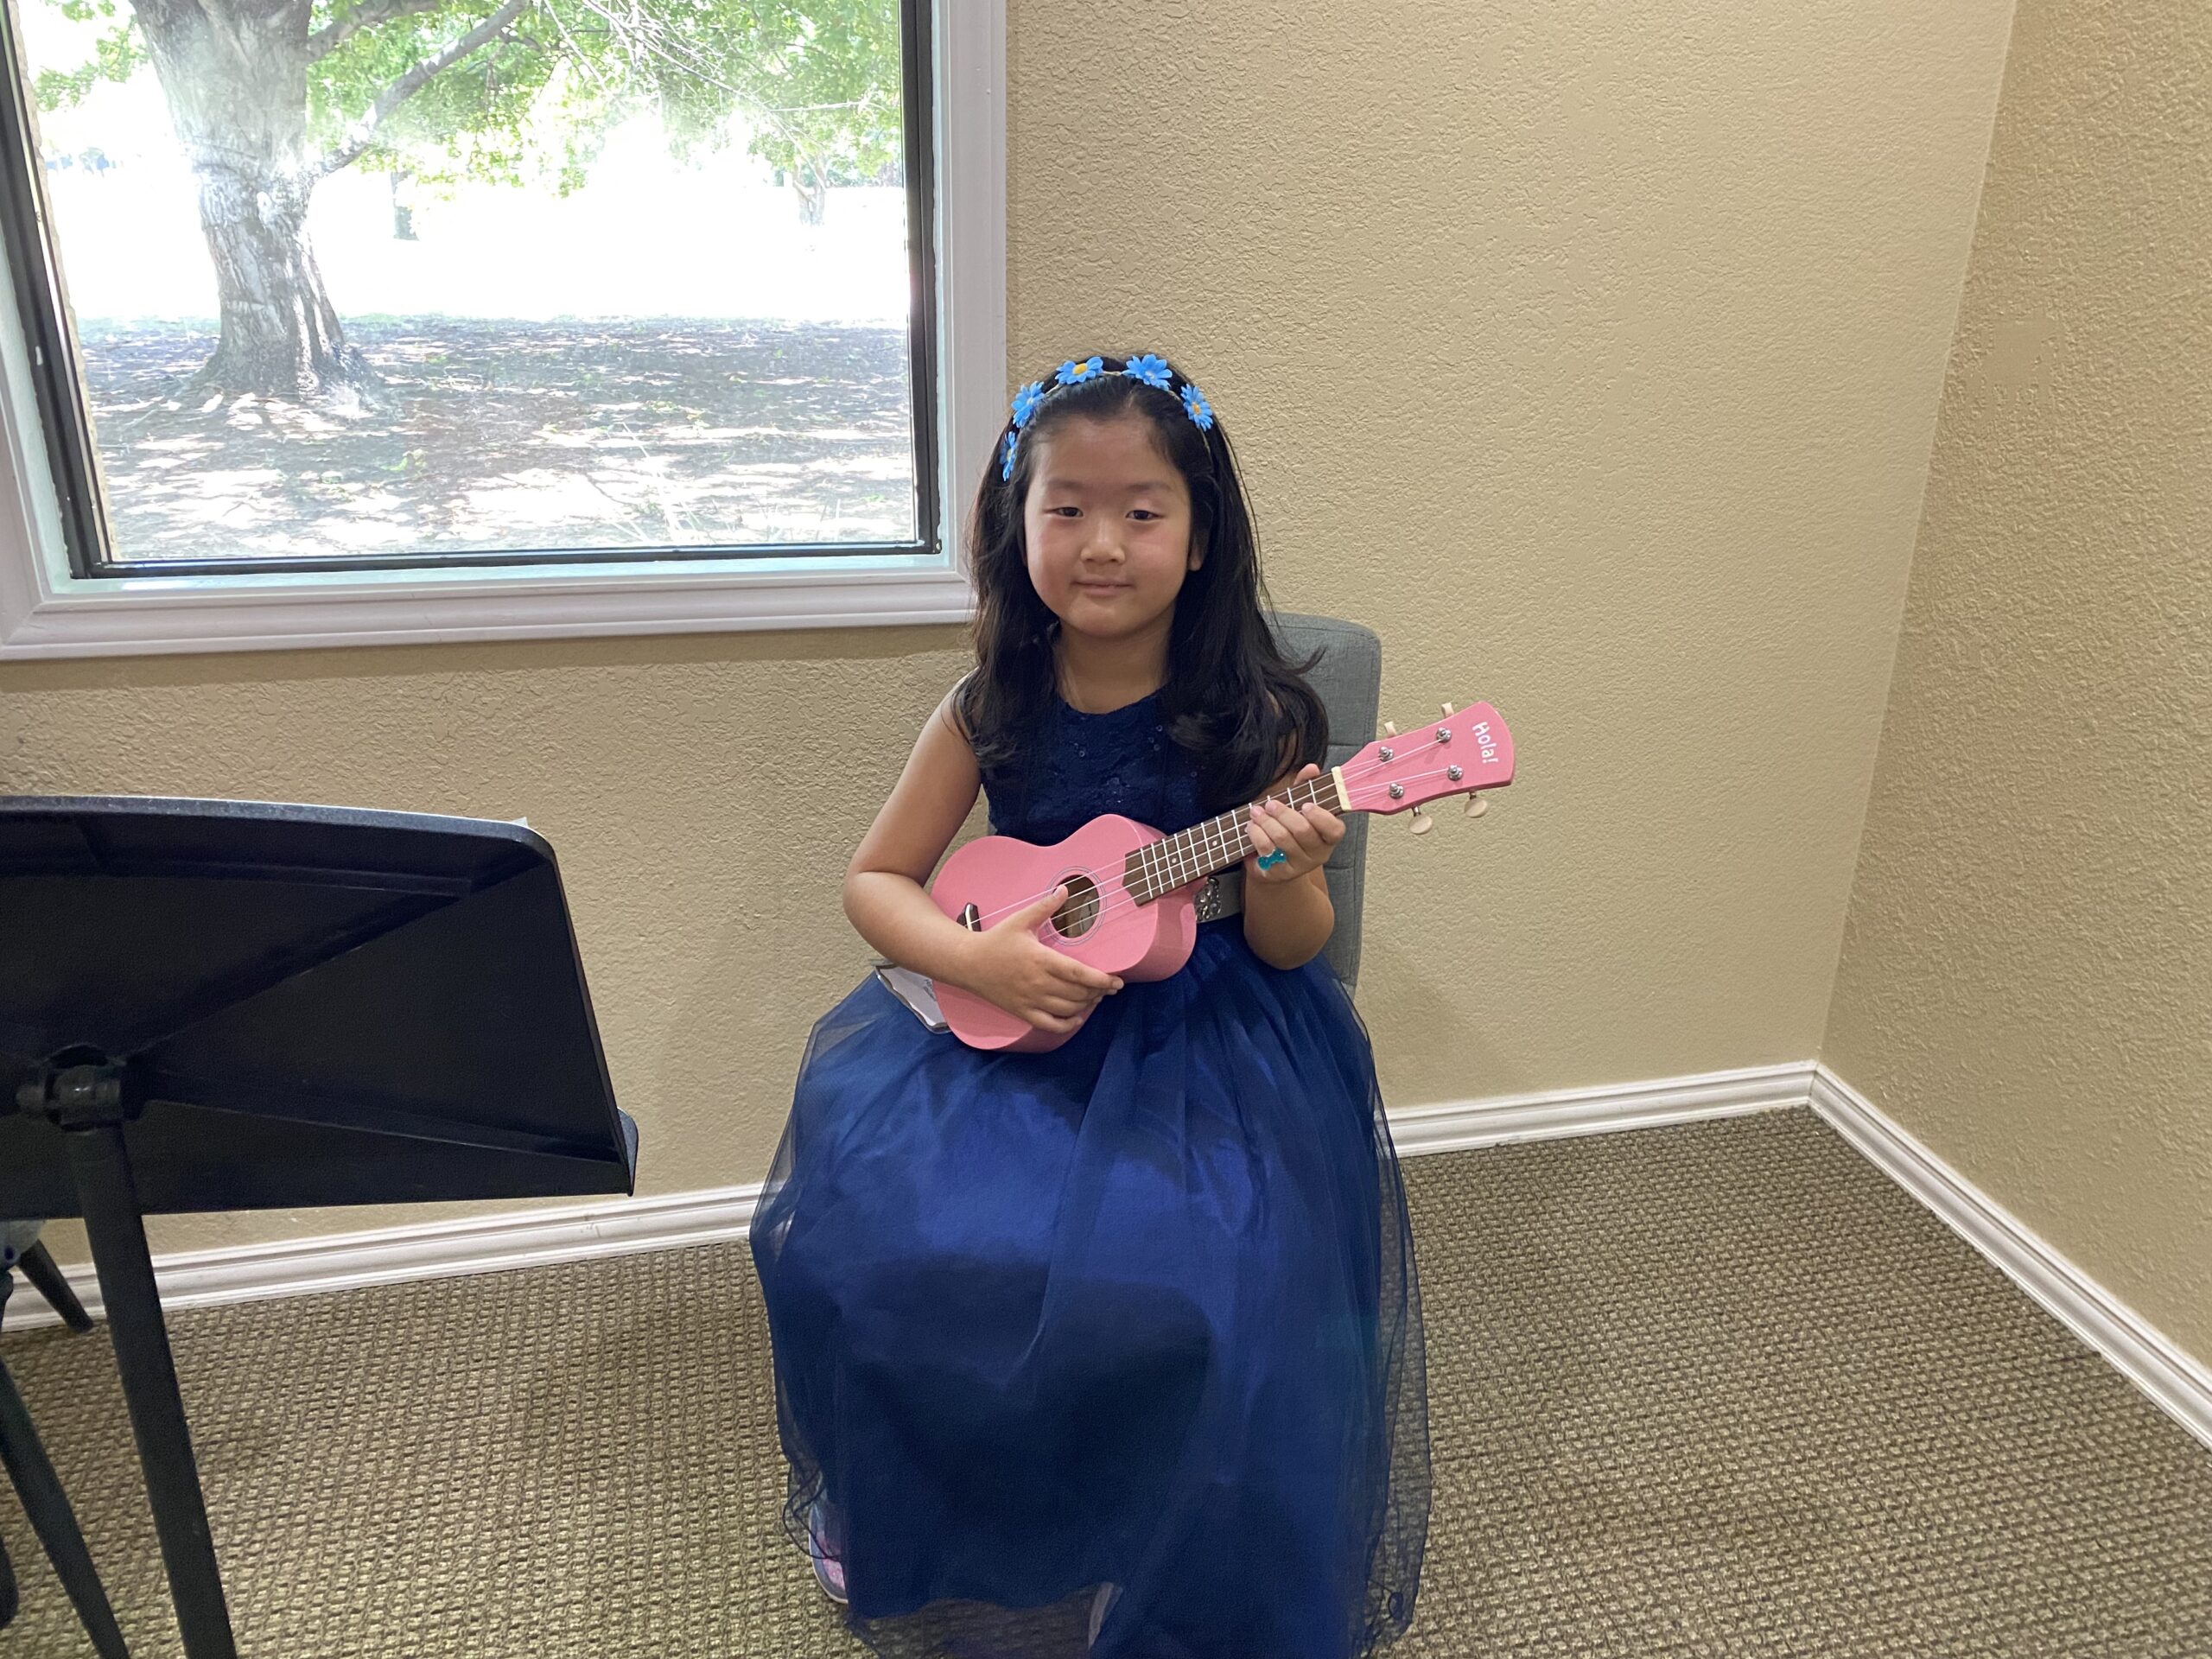 Flower Mound Music Academy offers private lessons in piano, voice, violin, viola, cello and guitar to students of all ages and levels in Flower Mound, Lewisville, Denton, Argyle, Keller area. Both in-person and virtual lessons are available.